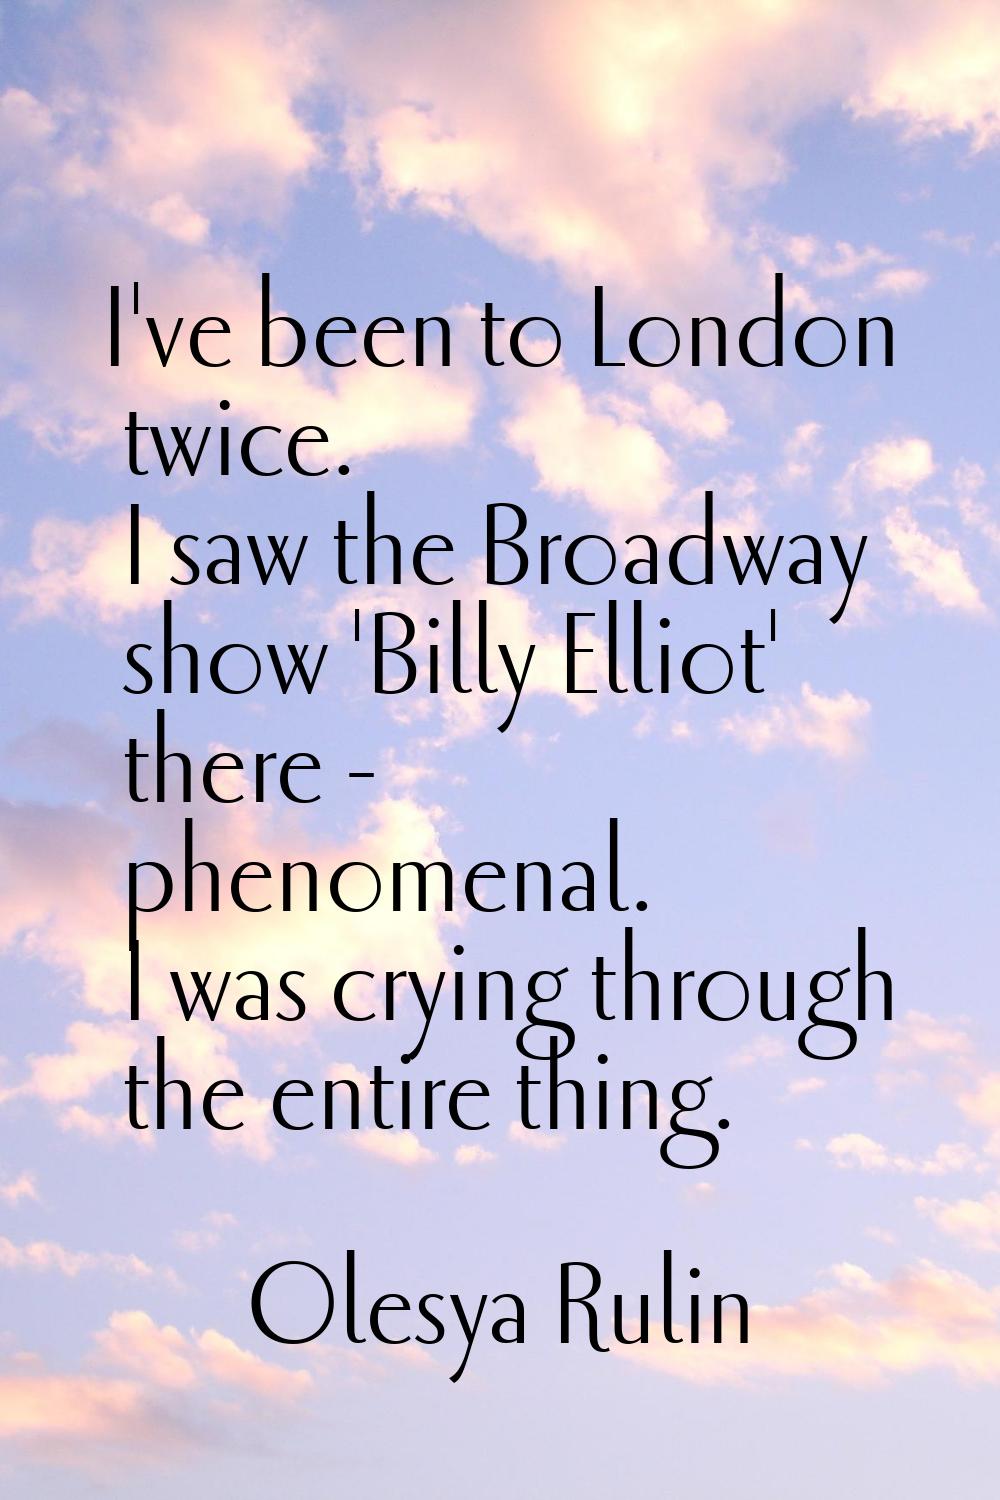 I've been to London twice. I saw the Broadway show 'Billy Elliot' there - phenomenal. I was crying 